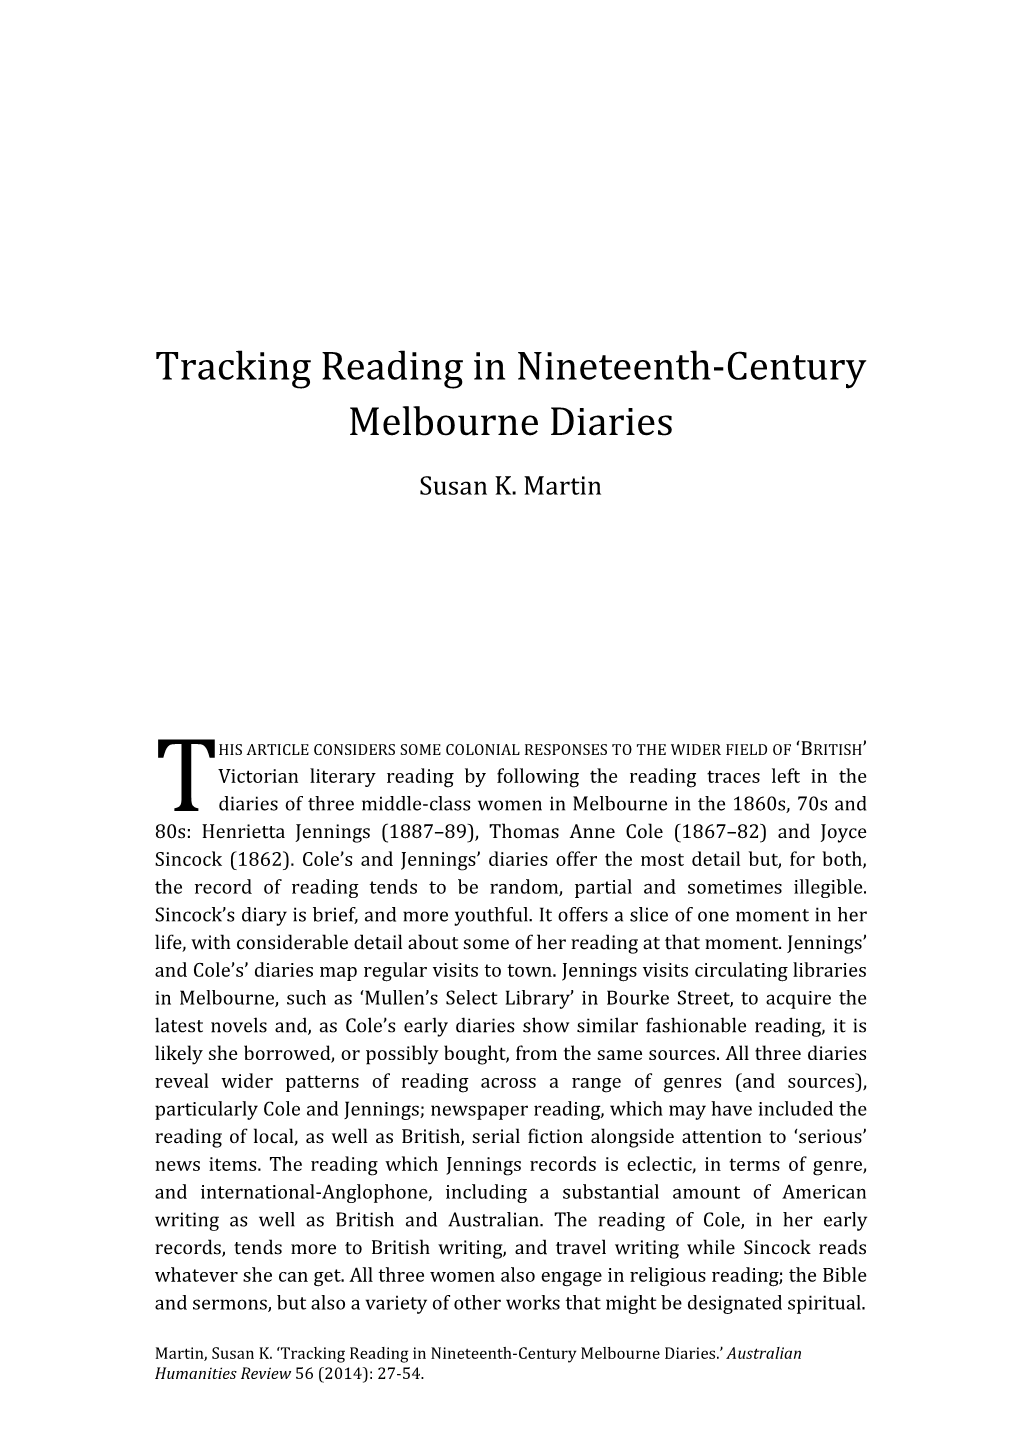 Tracking Reading in Nineteenth-Century Melbourne Diaries